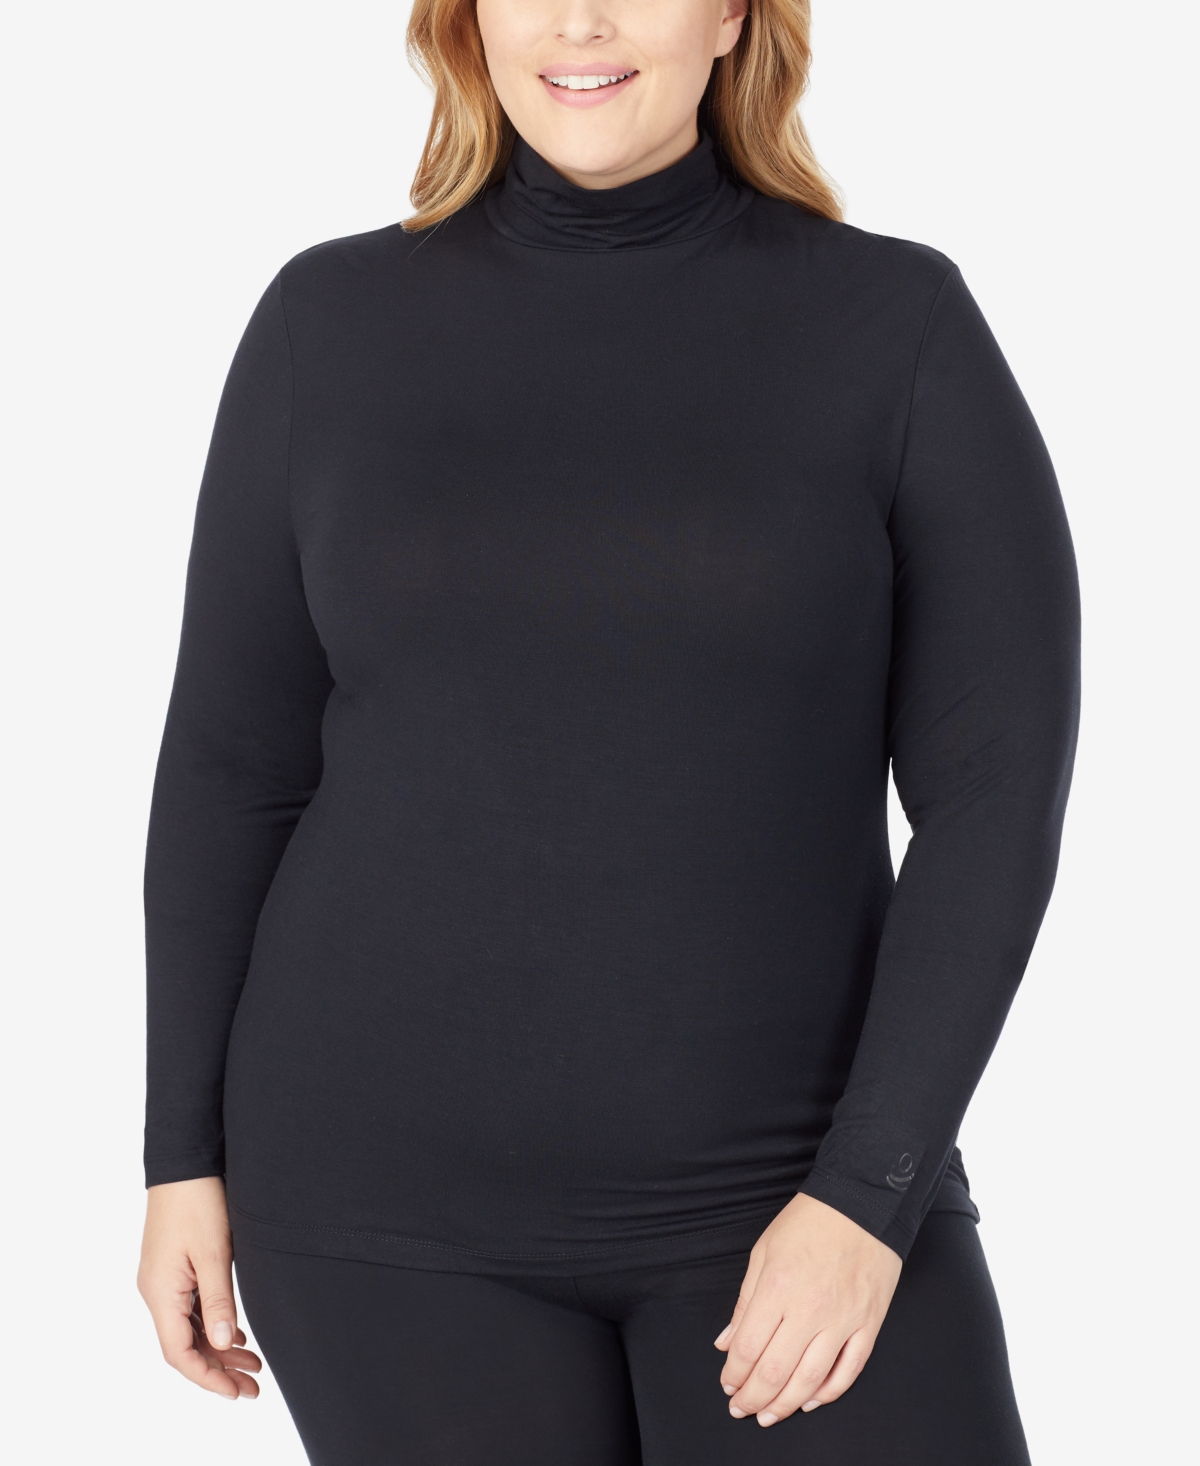 Plus Size Softwear with Stretch Turtleneck - Charcoal